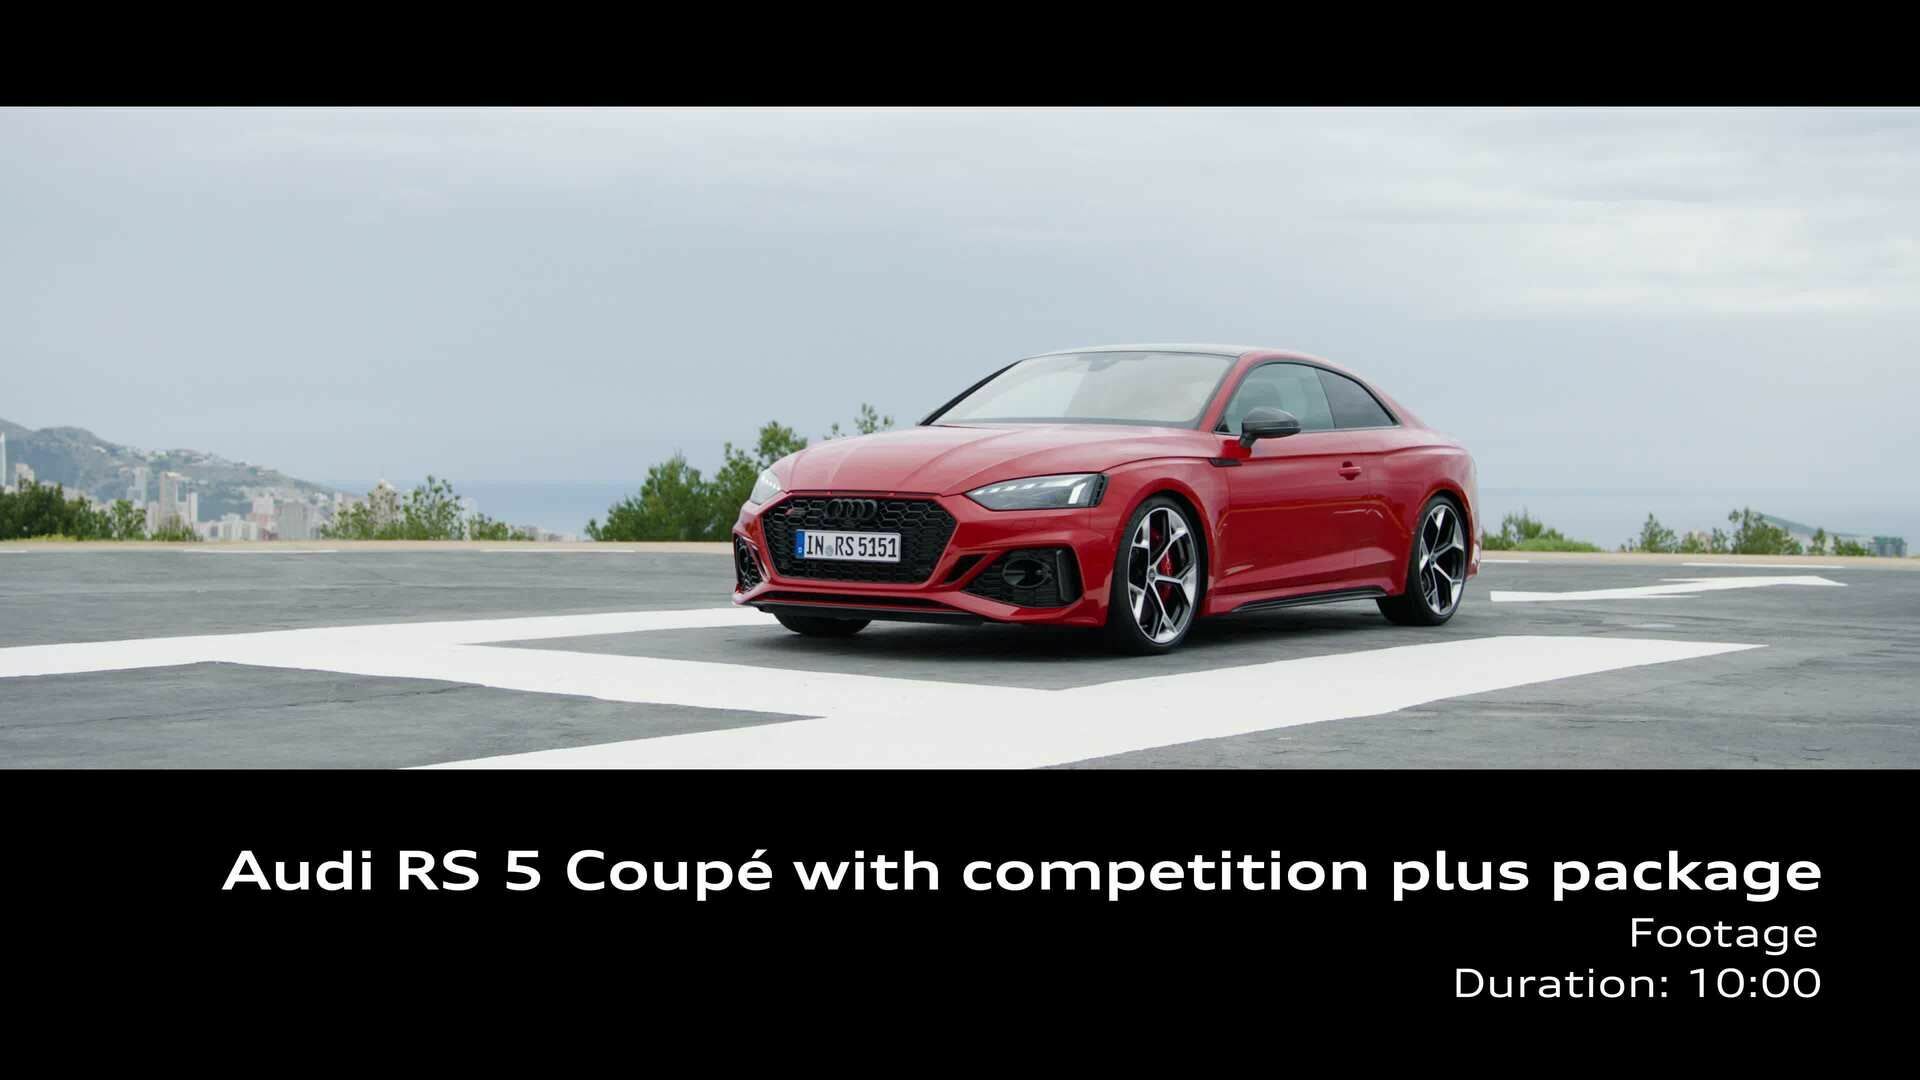 Footage: Audi RS 5 Coupé with competition plus package (Spain)